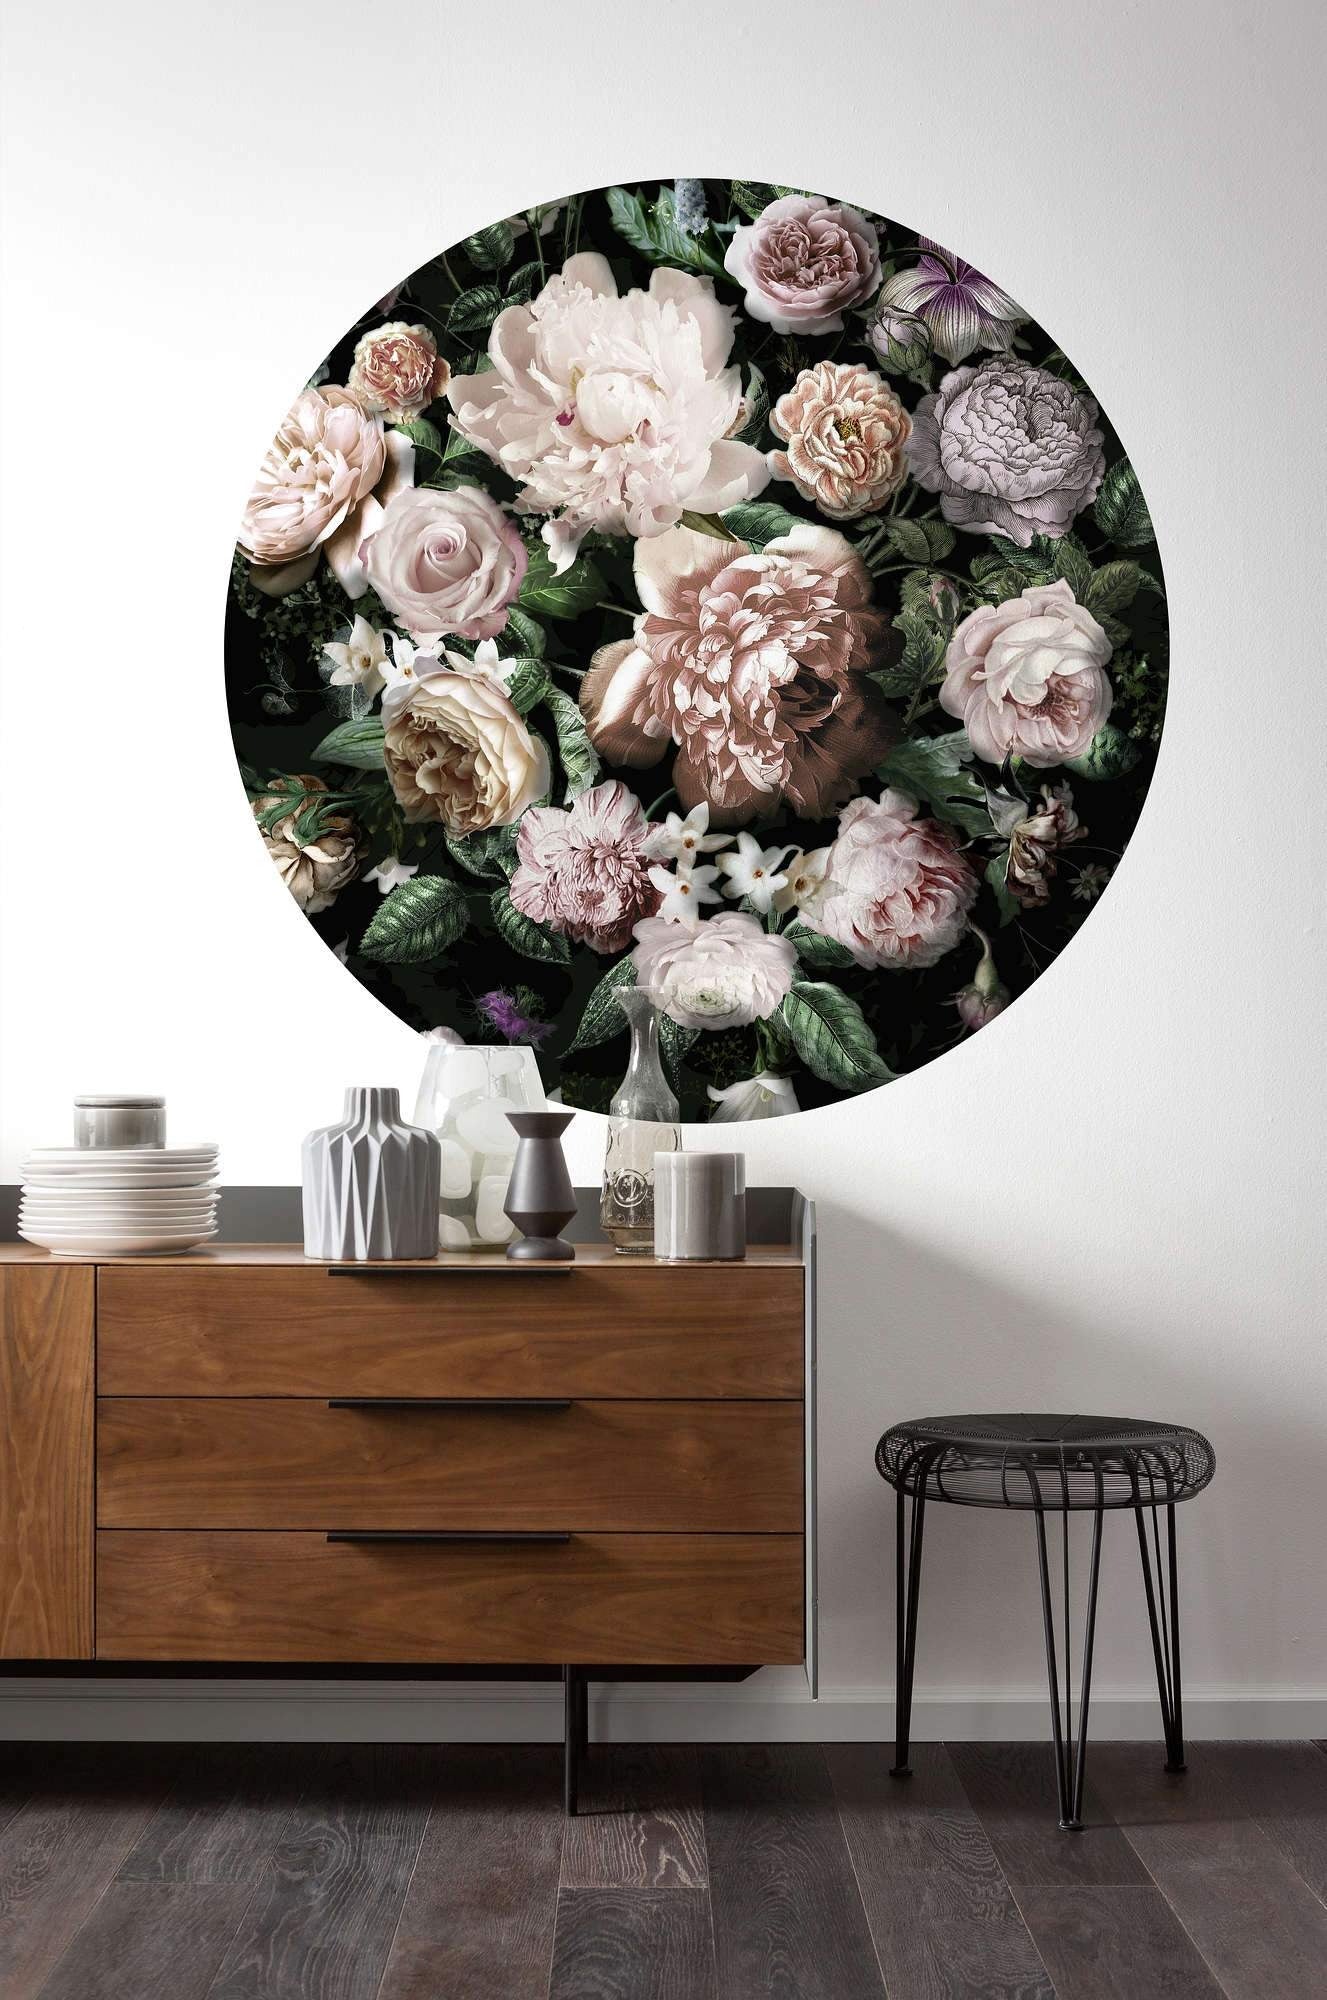 Couture Florals Circle Wall Art (Self-Adhesive)-Wall Decor-ABSTRACT WALLPAPERS, ART WALLPAPER, CIRCLE WALL ART, ECO MURALS, NATURE WALL ART, PATTERN WALLPAPERS, SUSTAINABLE DECOR-Forest Homes-Nature inspired decor-Nature decor